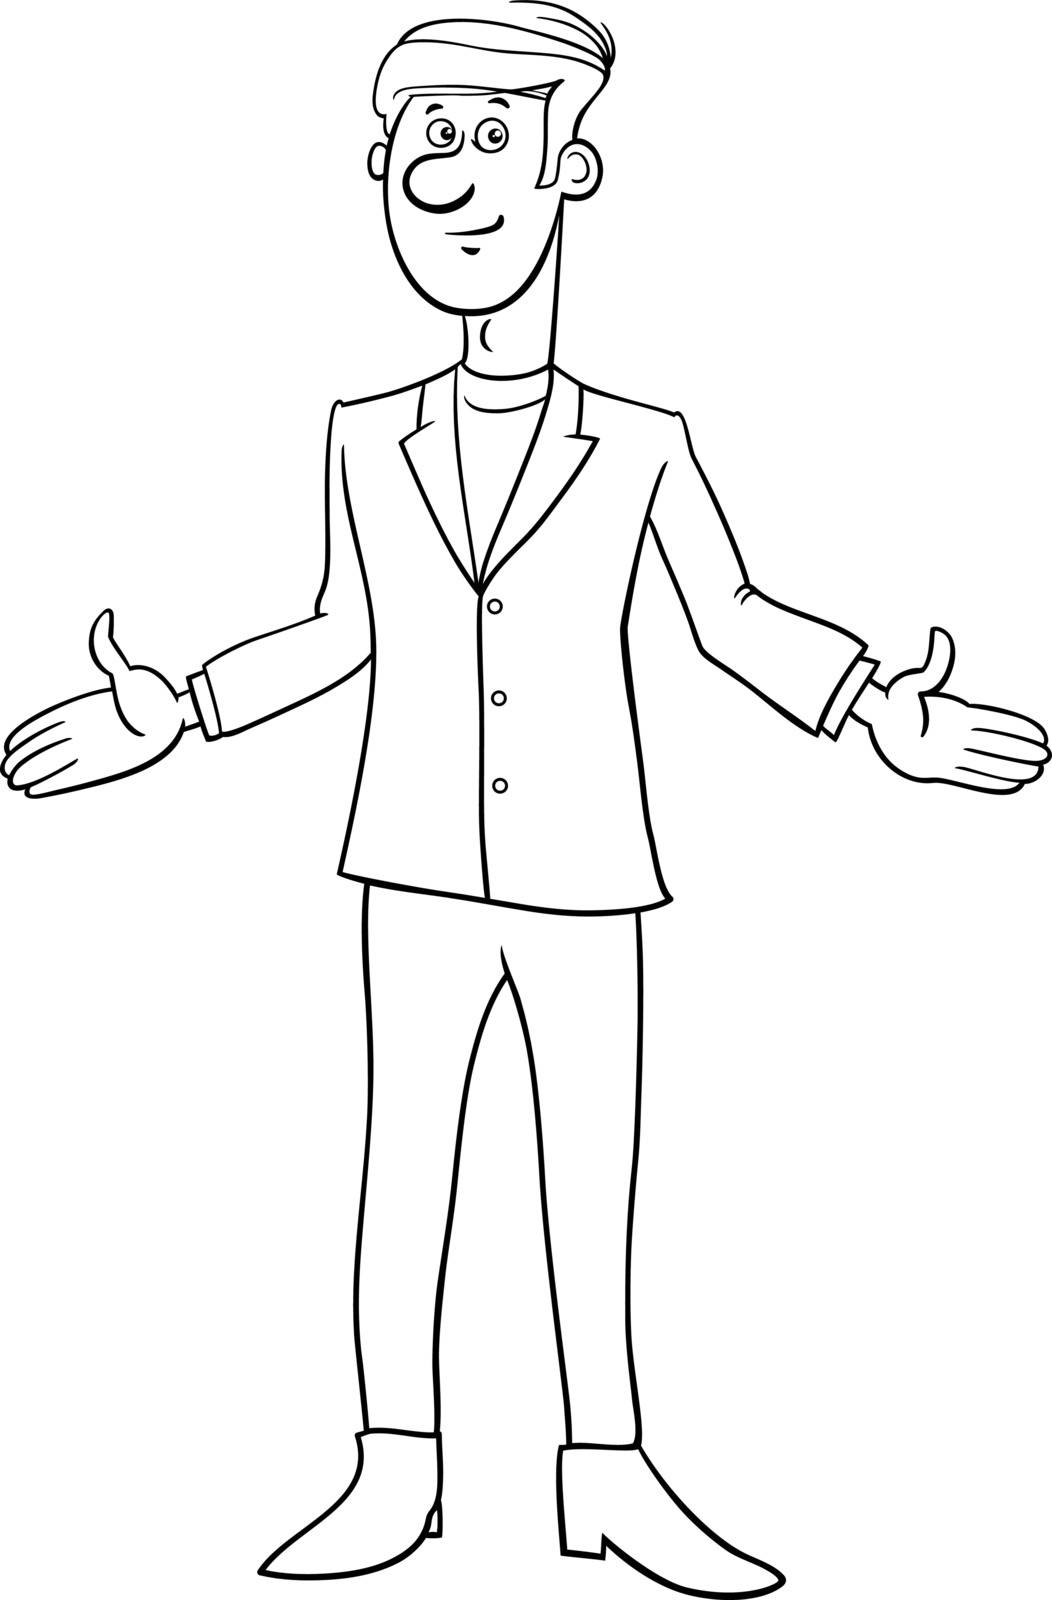 Black and White Cartoon Illustration of Young Man or Businessman Character Coloring Page